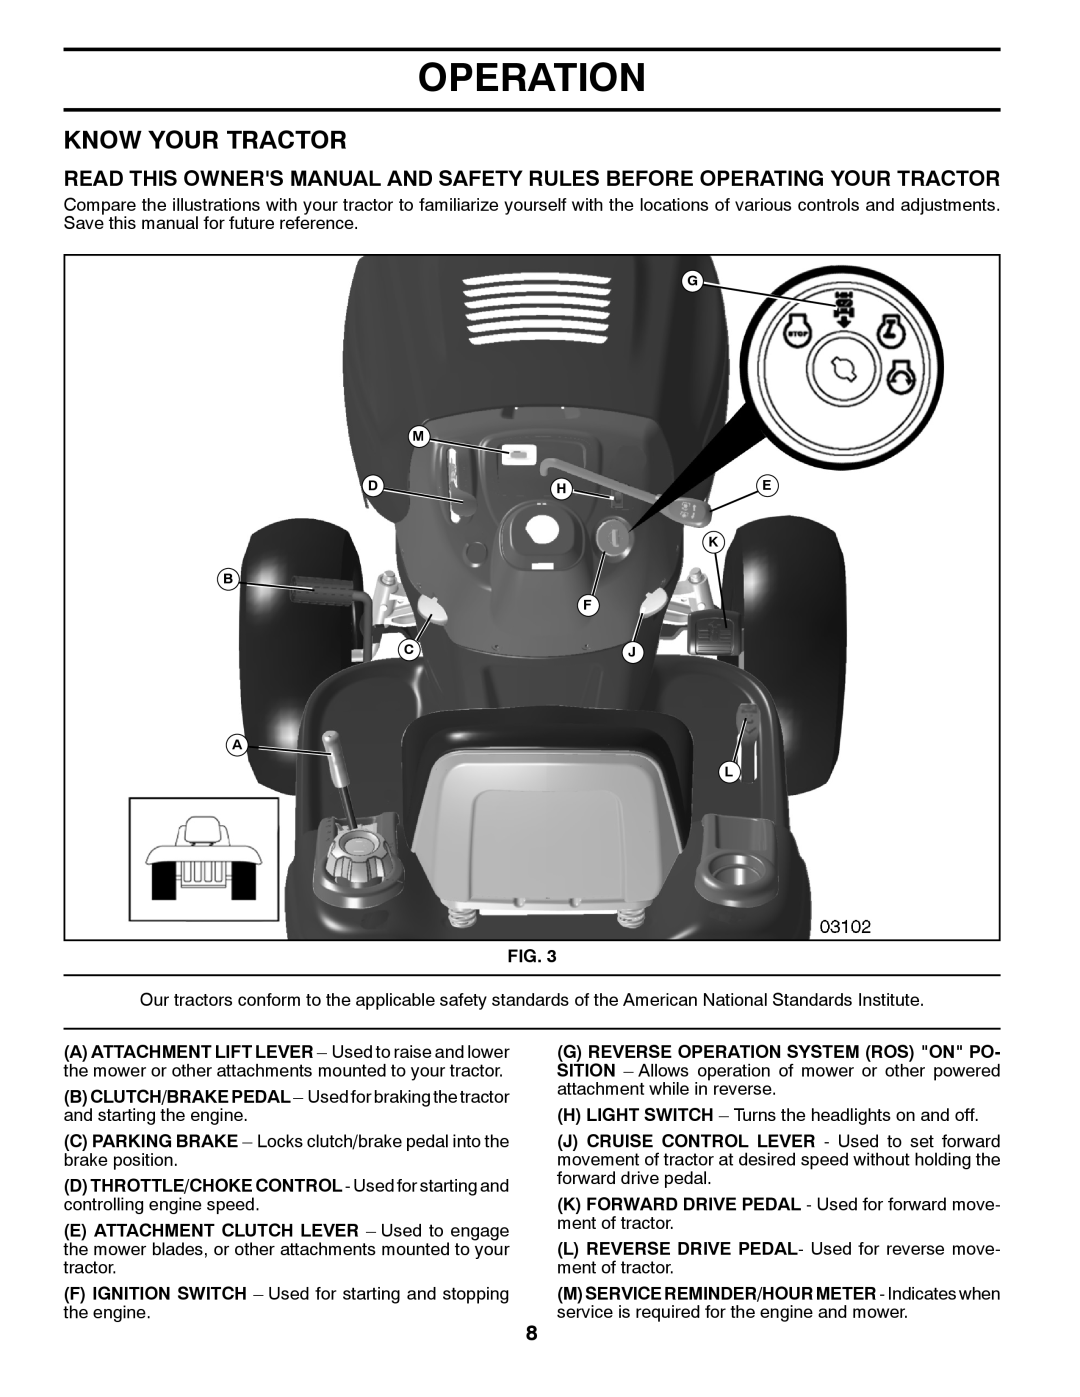 Poulan 412412 manual Know Your Tractor, Operation 